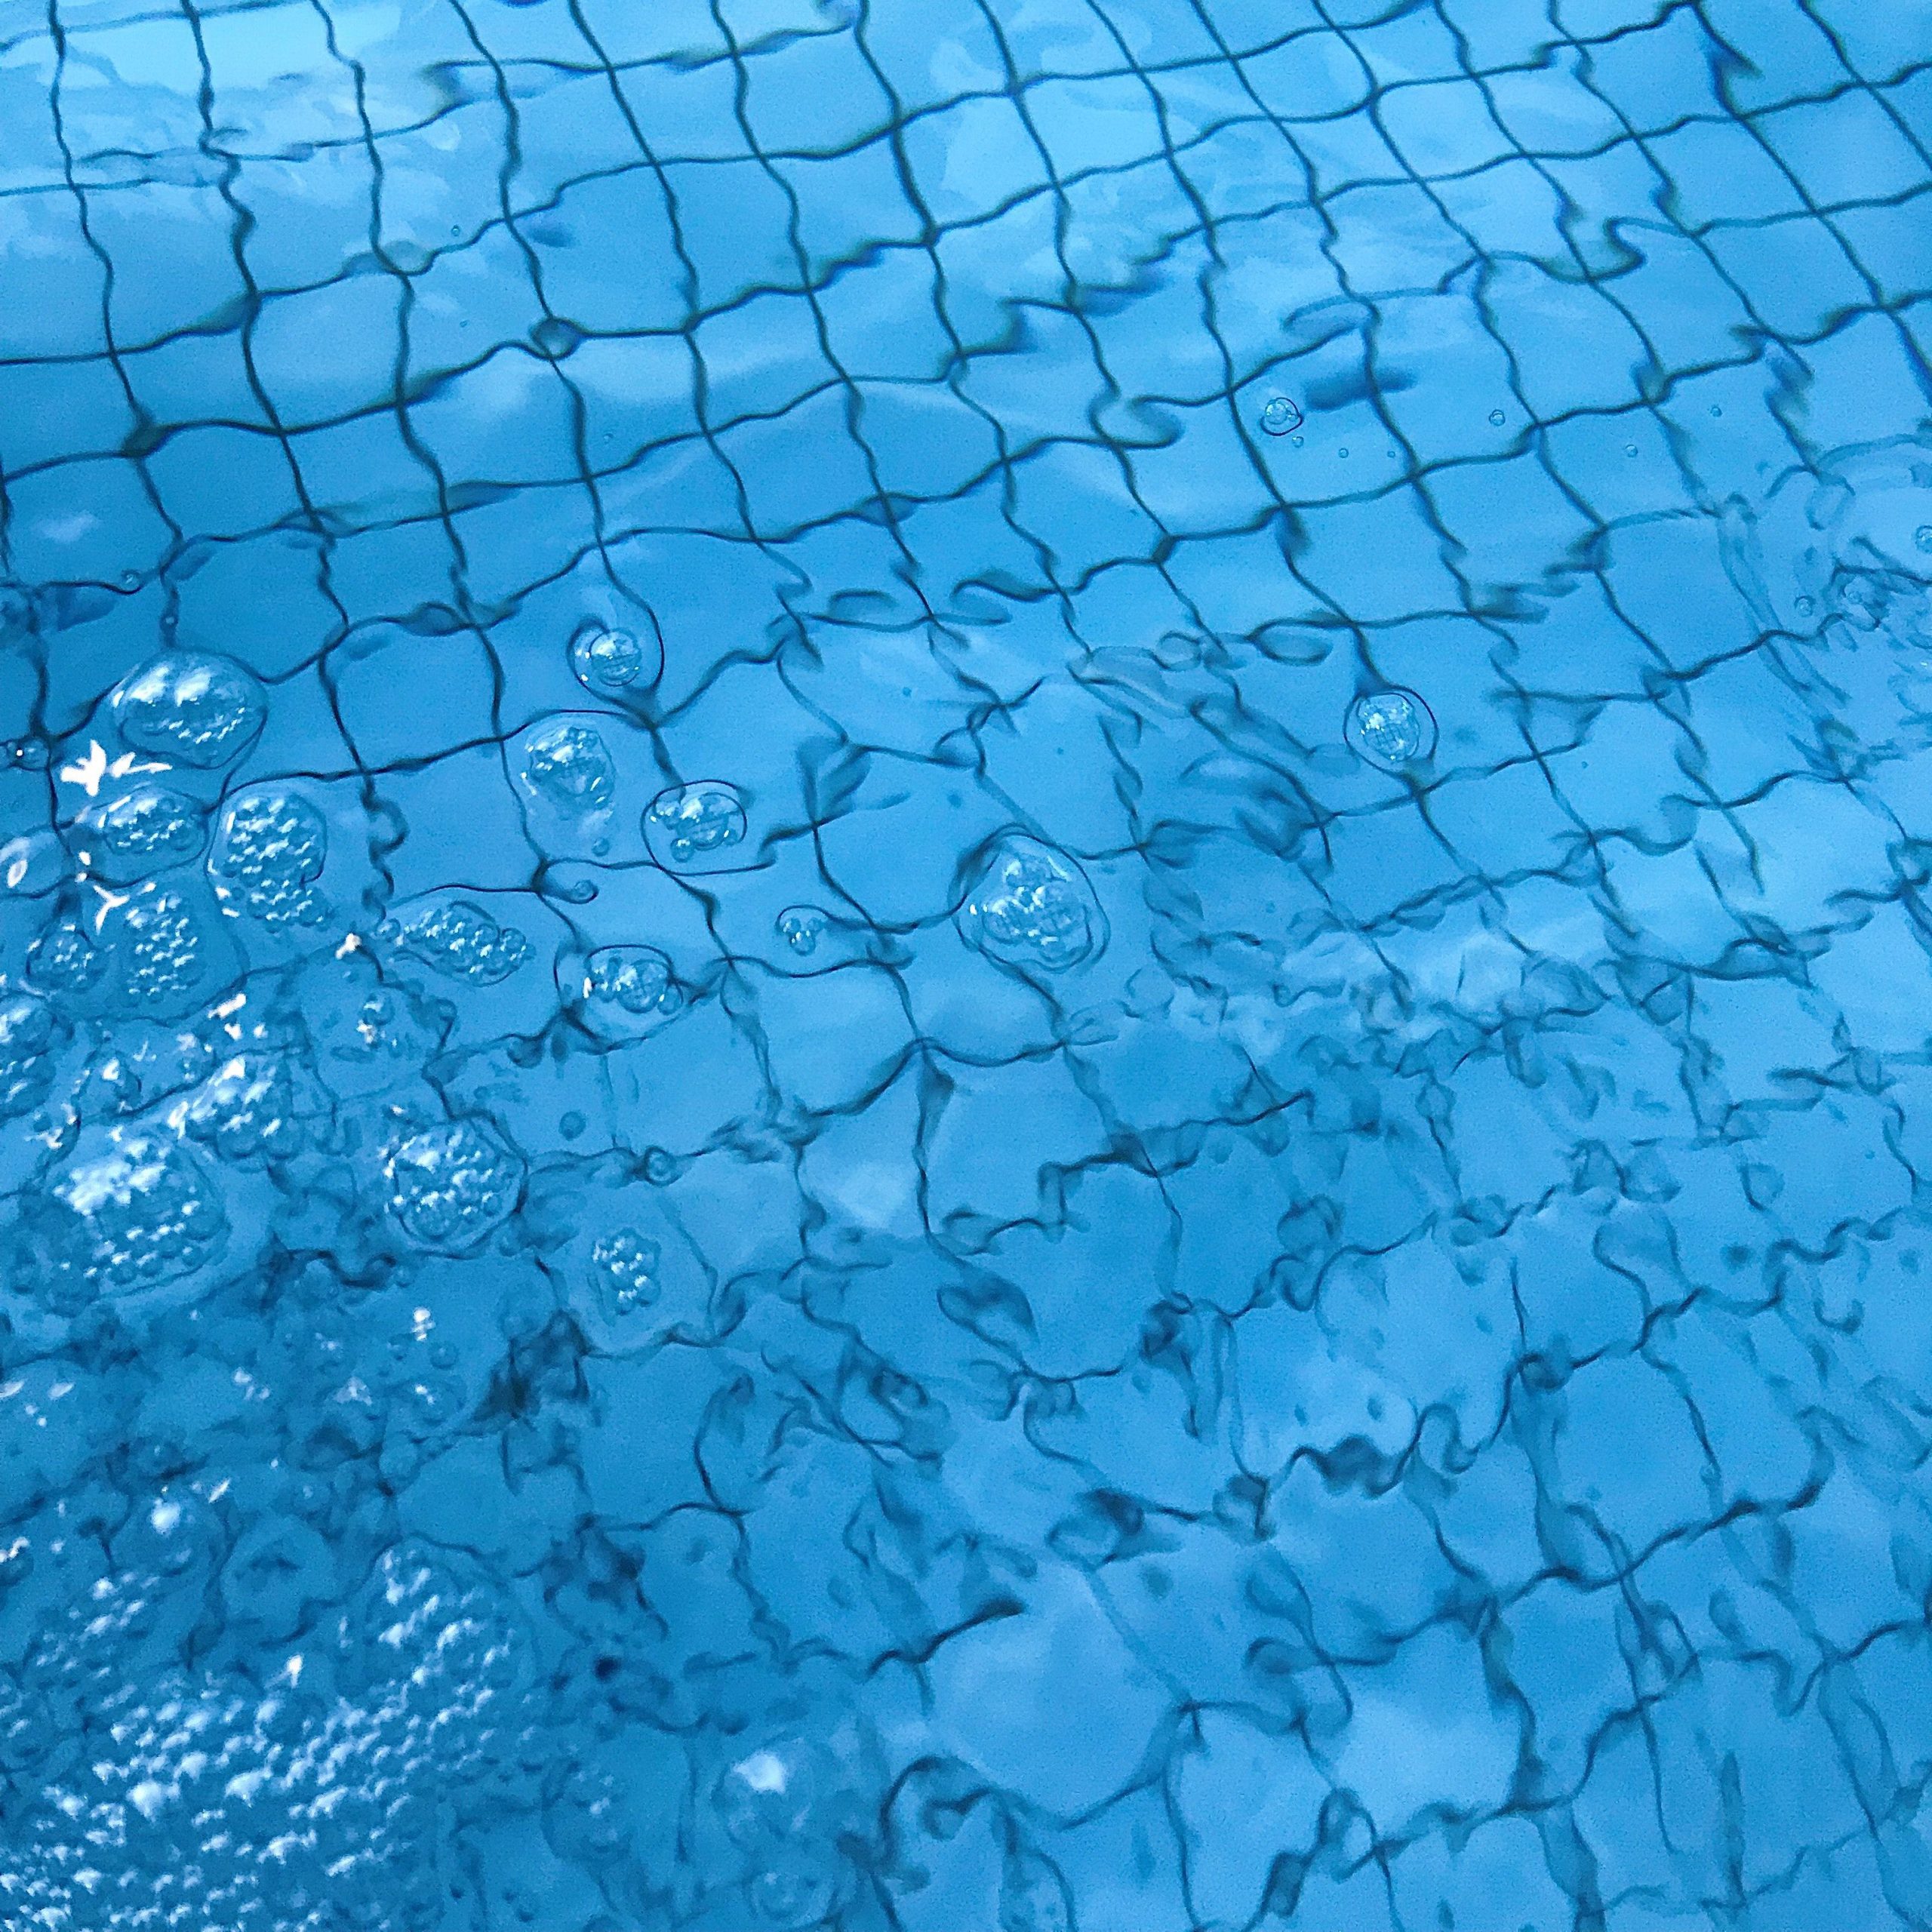 Air bubbles in pool